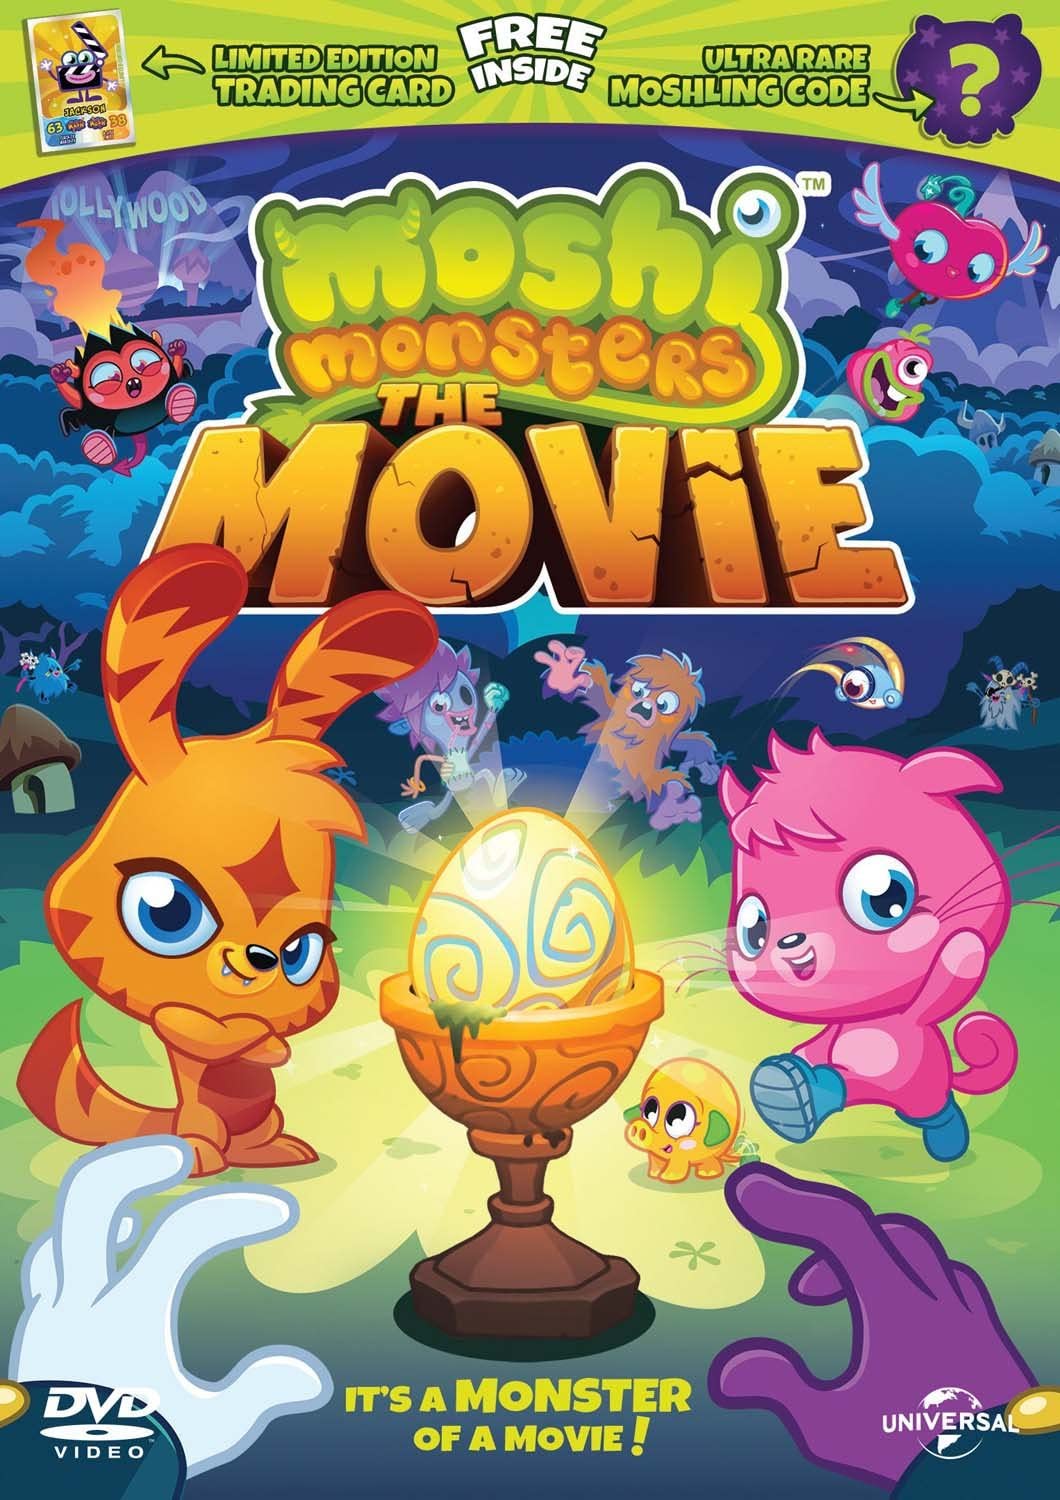 Moshi Monsters with Trading Card and Moshling Code [2013] [DVD]